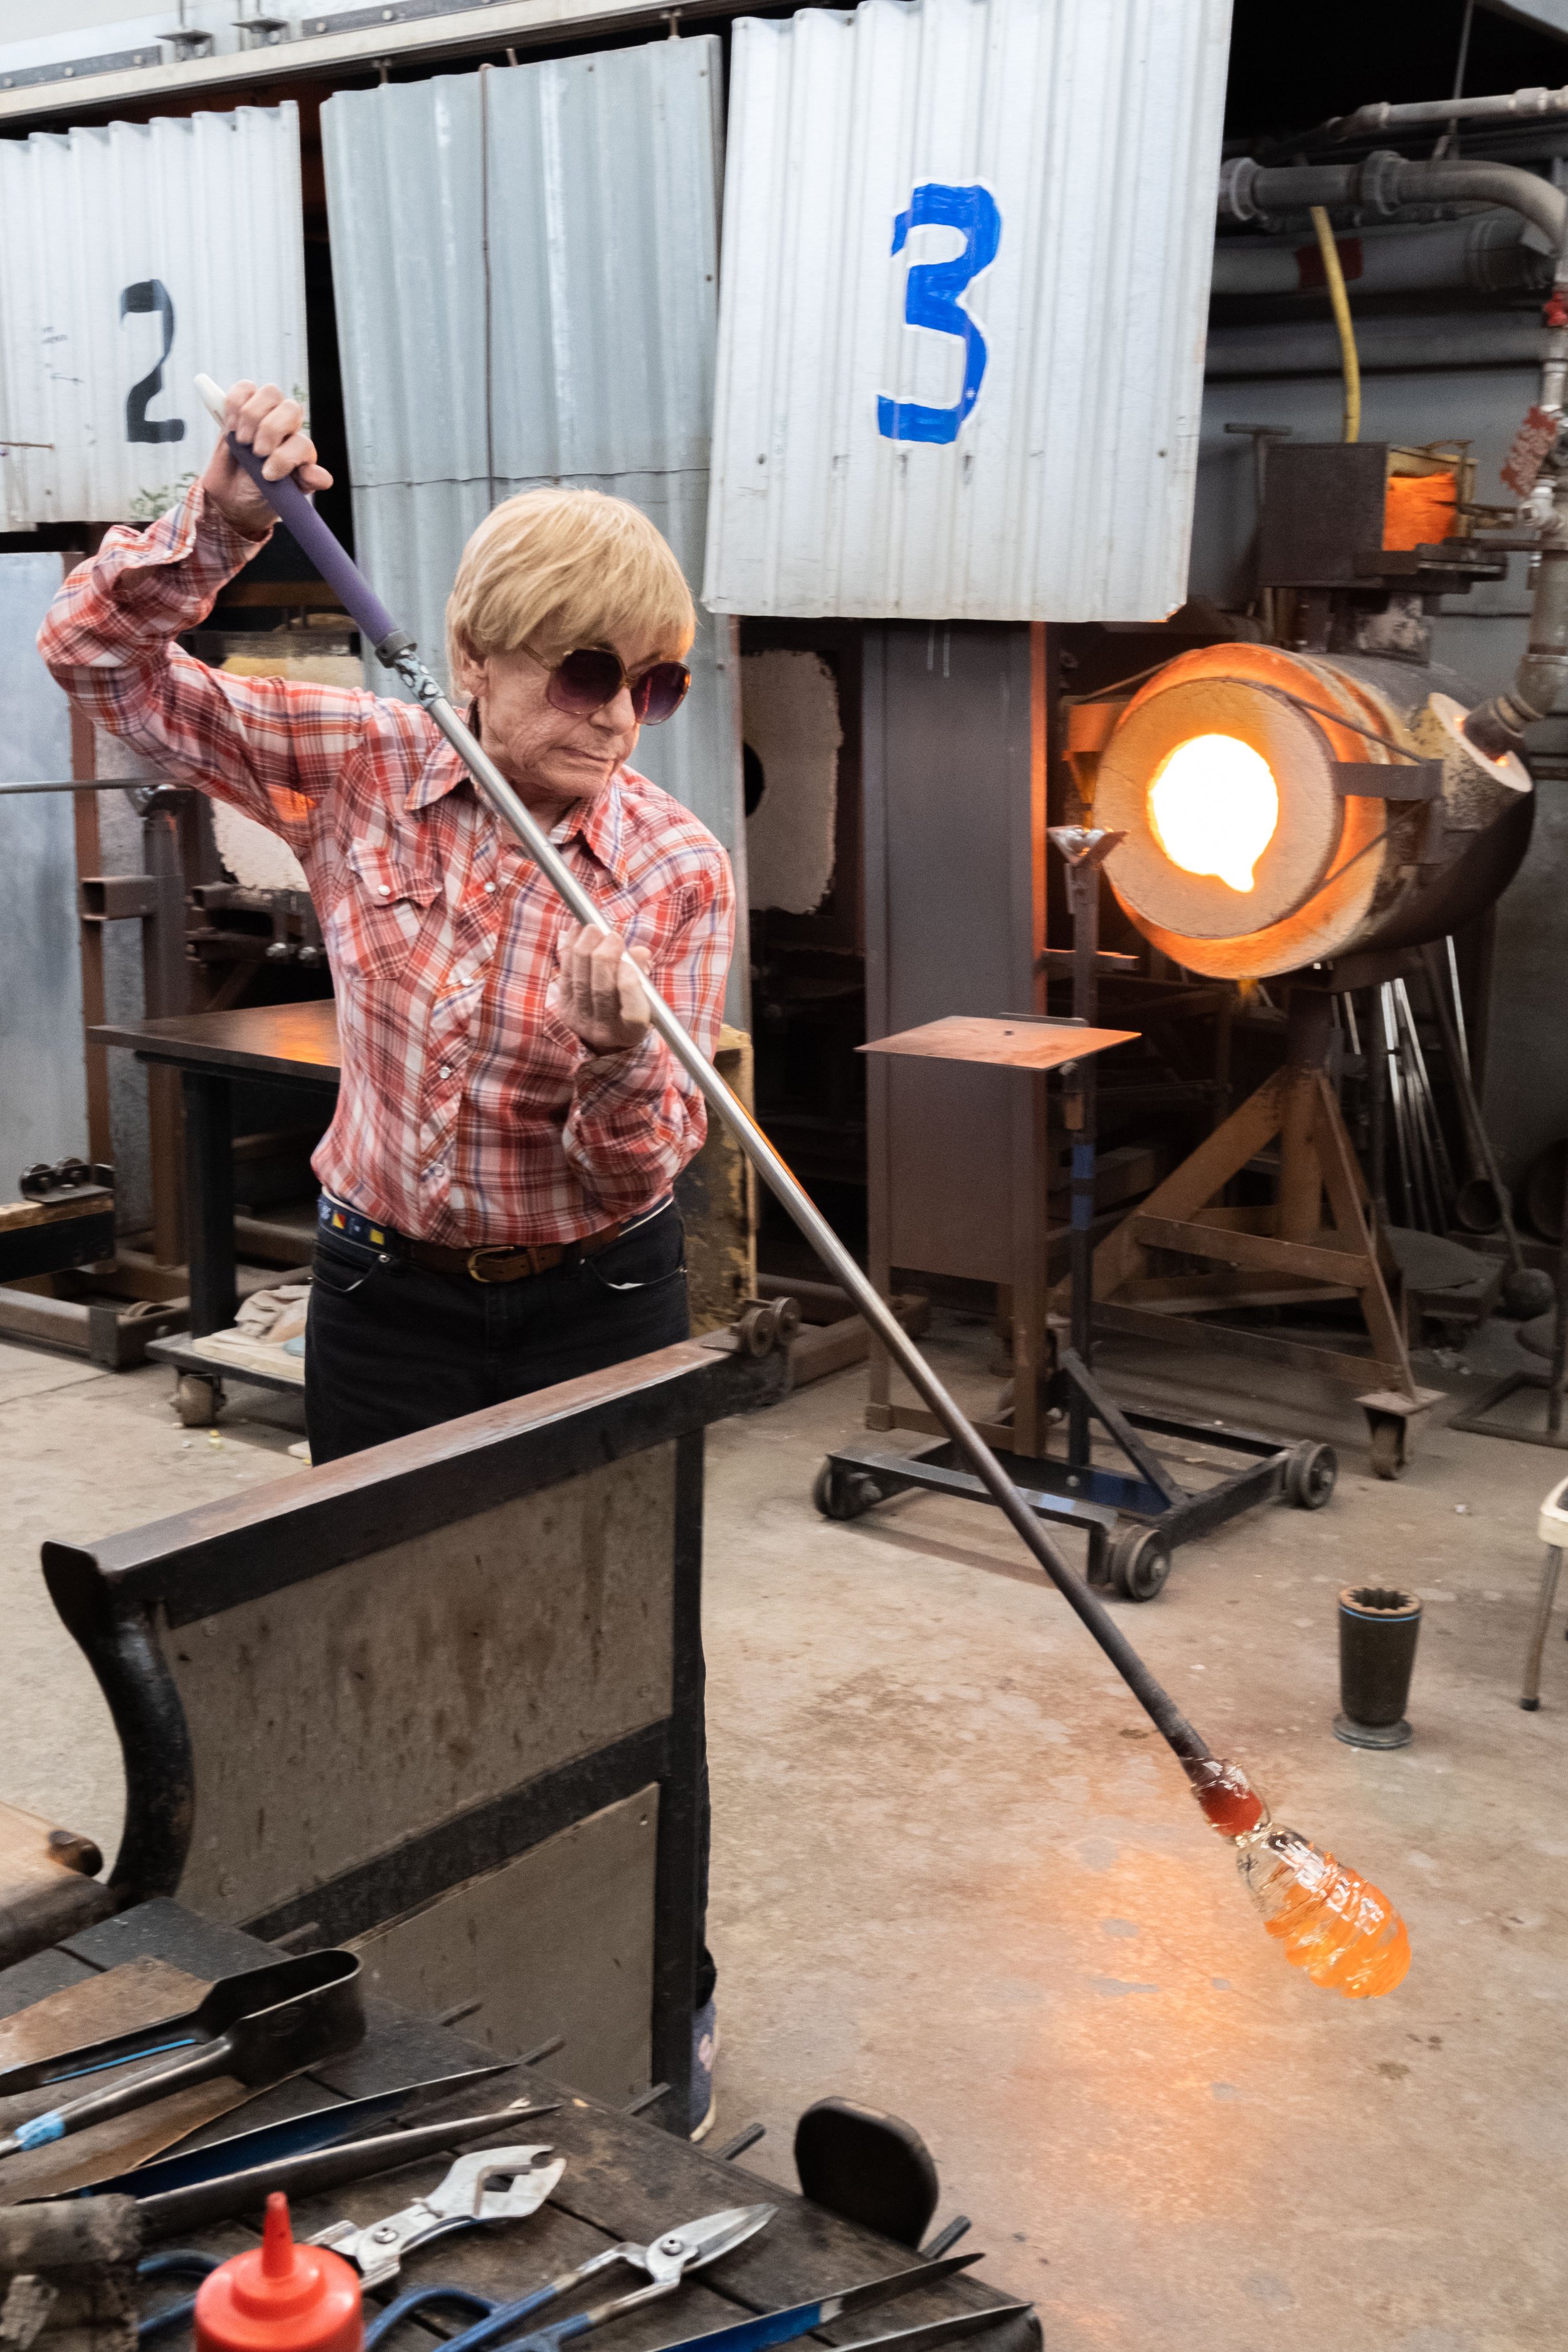  Seija Gerdt has been a part of the Santa Monica College glass blowing program since the beginning. Her birthday wish was to blow glass on her 90th birthdhday, which is in a few weeks, she says. "I never stop doing things." (Akemi Rico | The Corsair)